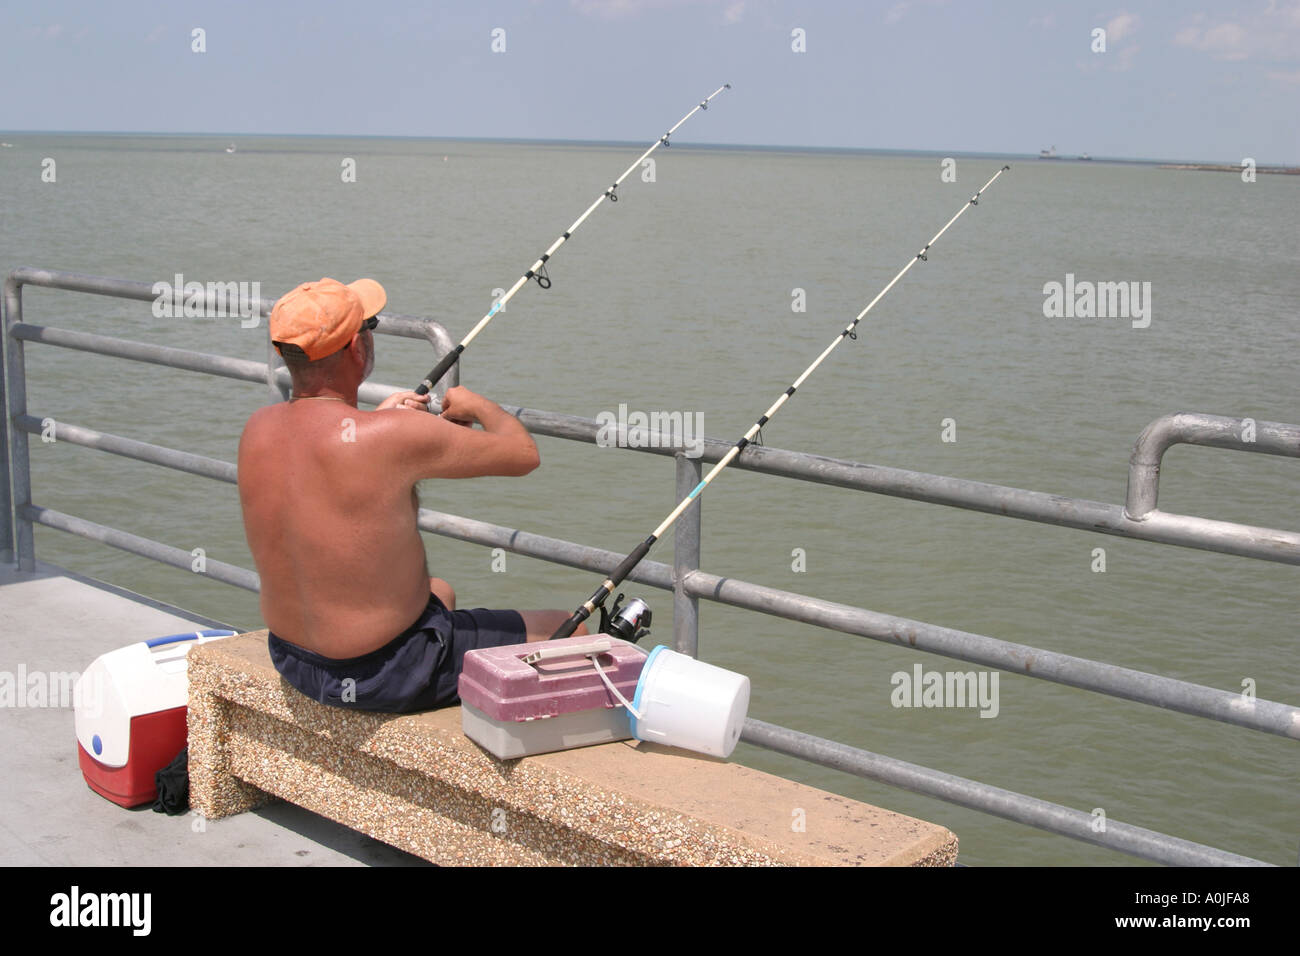 Cleveland Ohio,Lake Erie,Edgewater Park,fishing,sport,athlete,recreation,water,from pier,OH0614040069 Stock Photo